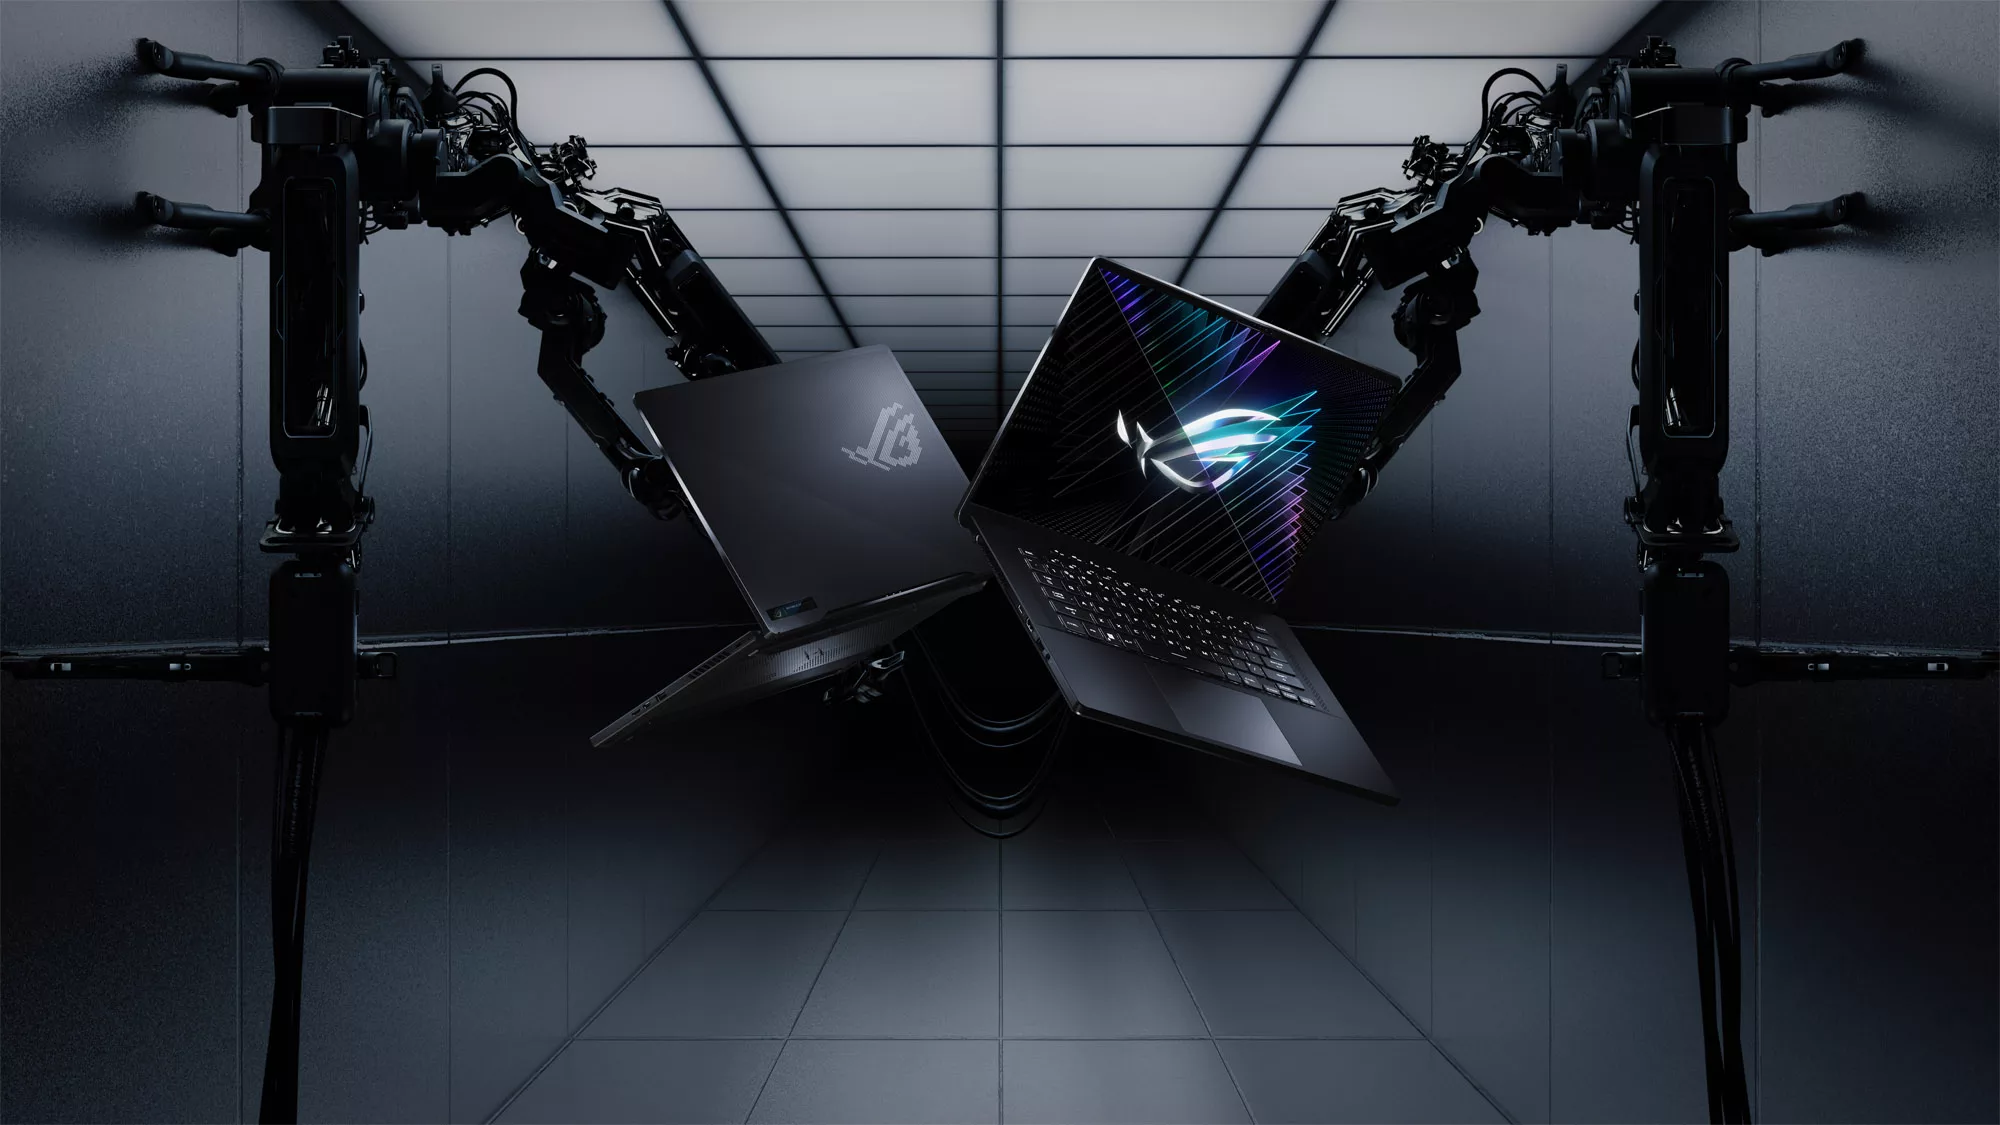 A front and rear view of the ROG Zephyrus M16 laptops, held by mechanical arms, with the ROG logo visible on screen.